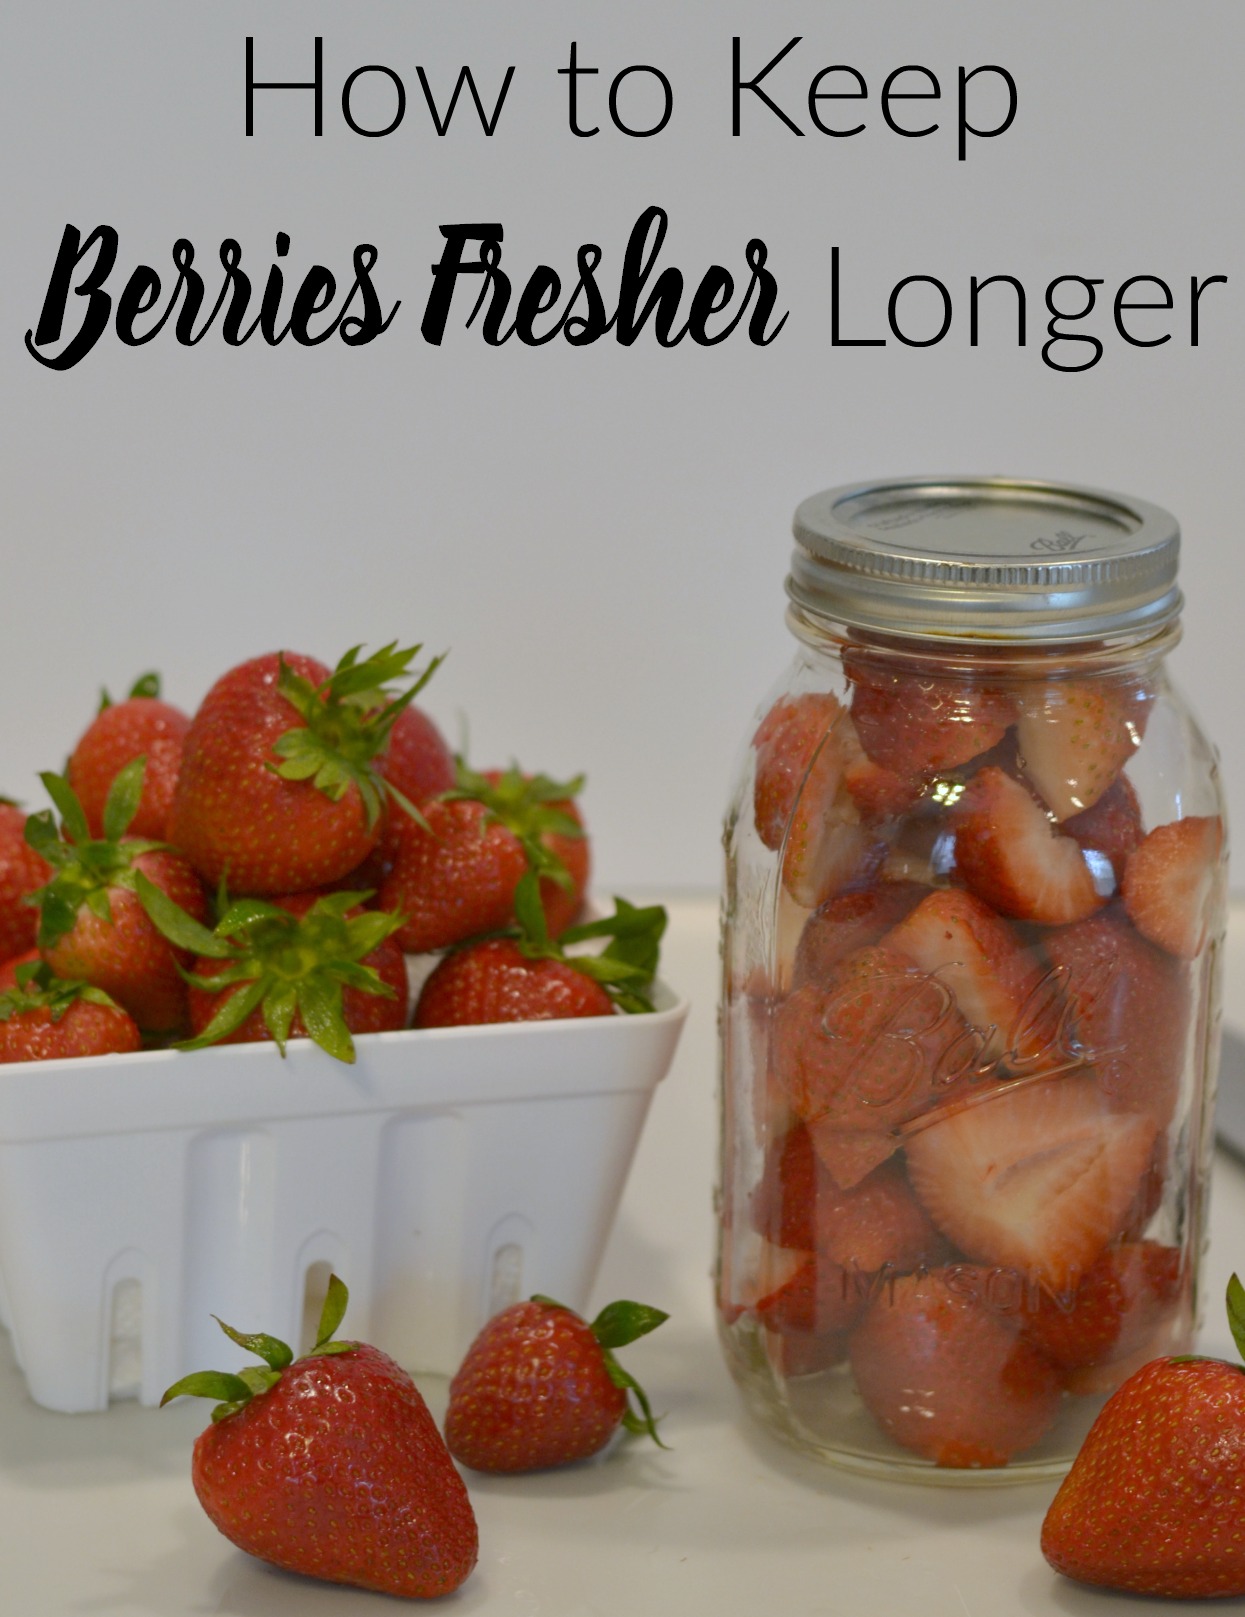 How to Keep Berries Fresher Longer! These tips are easy, cheap and they work!